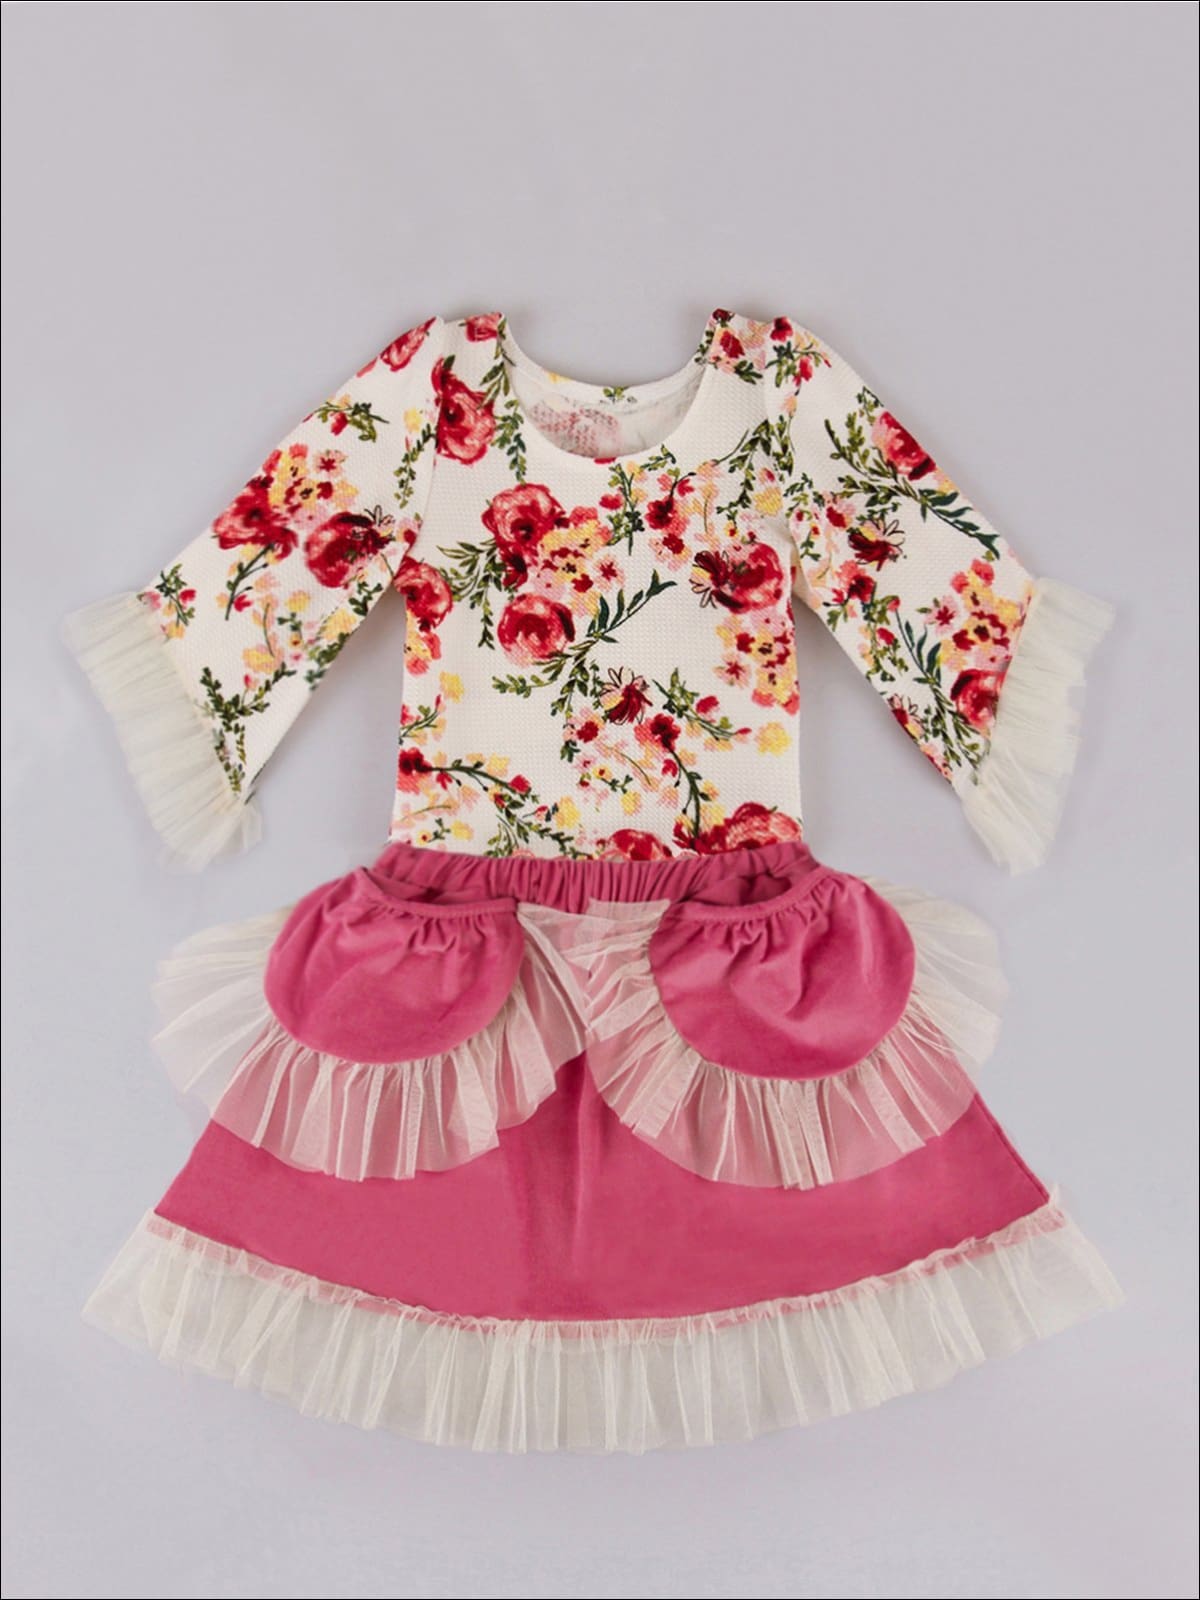 Girls Crème & Dusty Rose Skirt & Floral Top Set - Girls Fall Casual Set